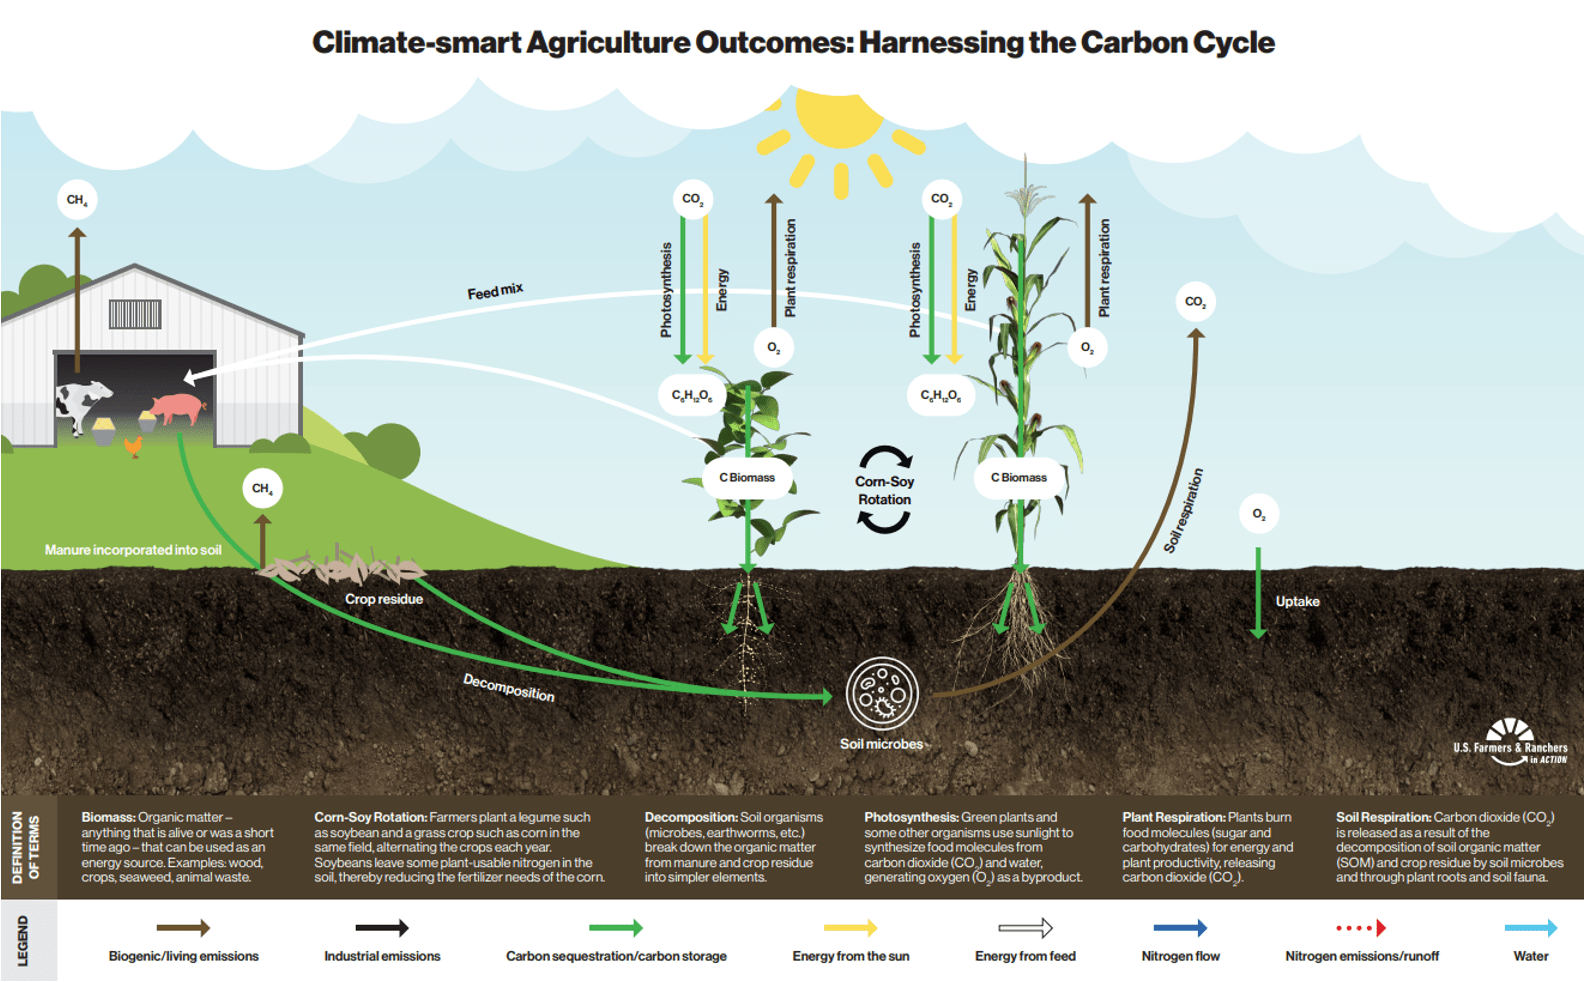 How does carbon cycle through agricultural systems?